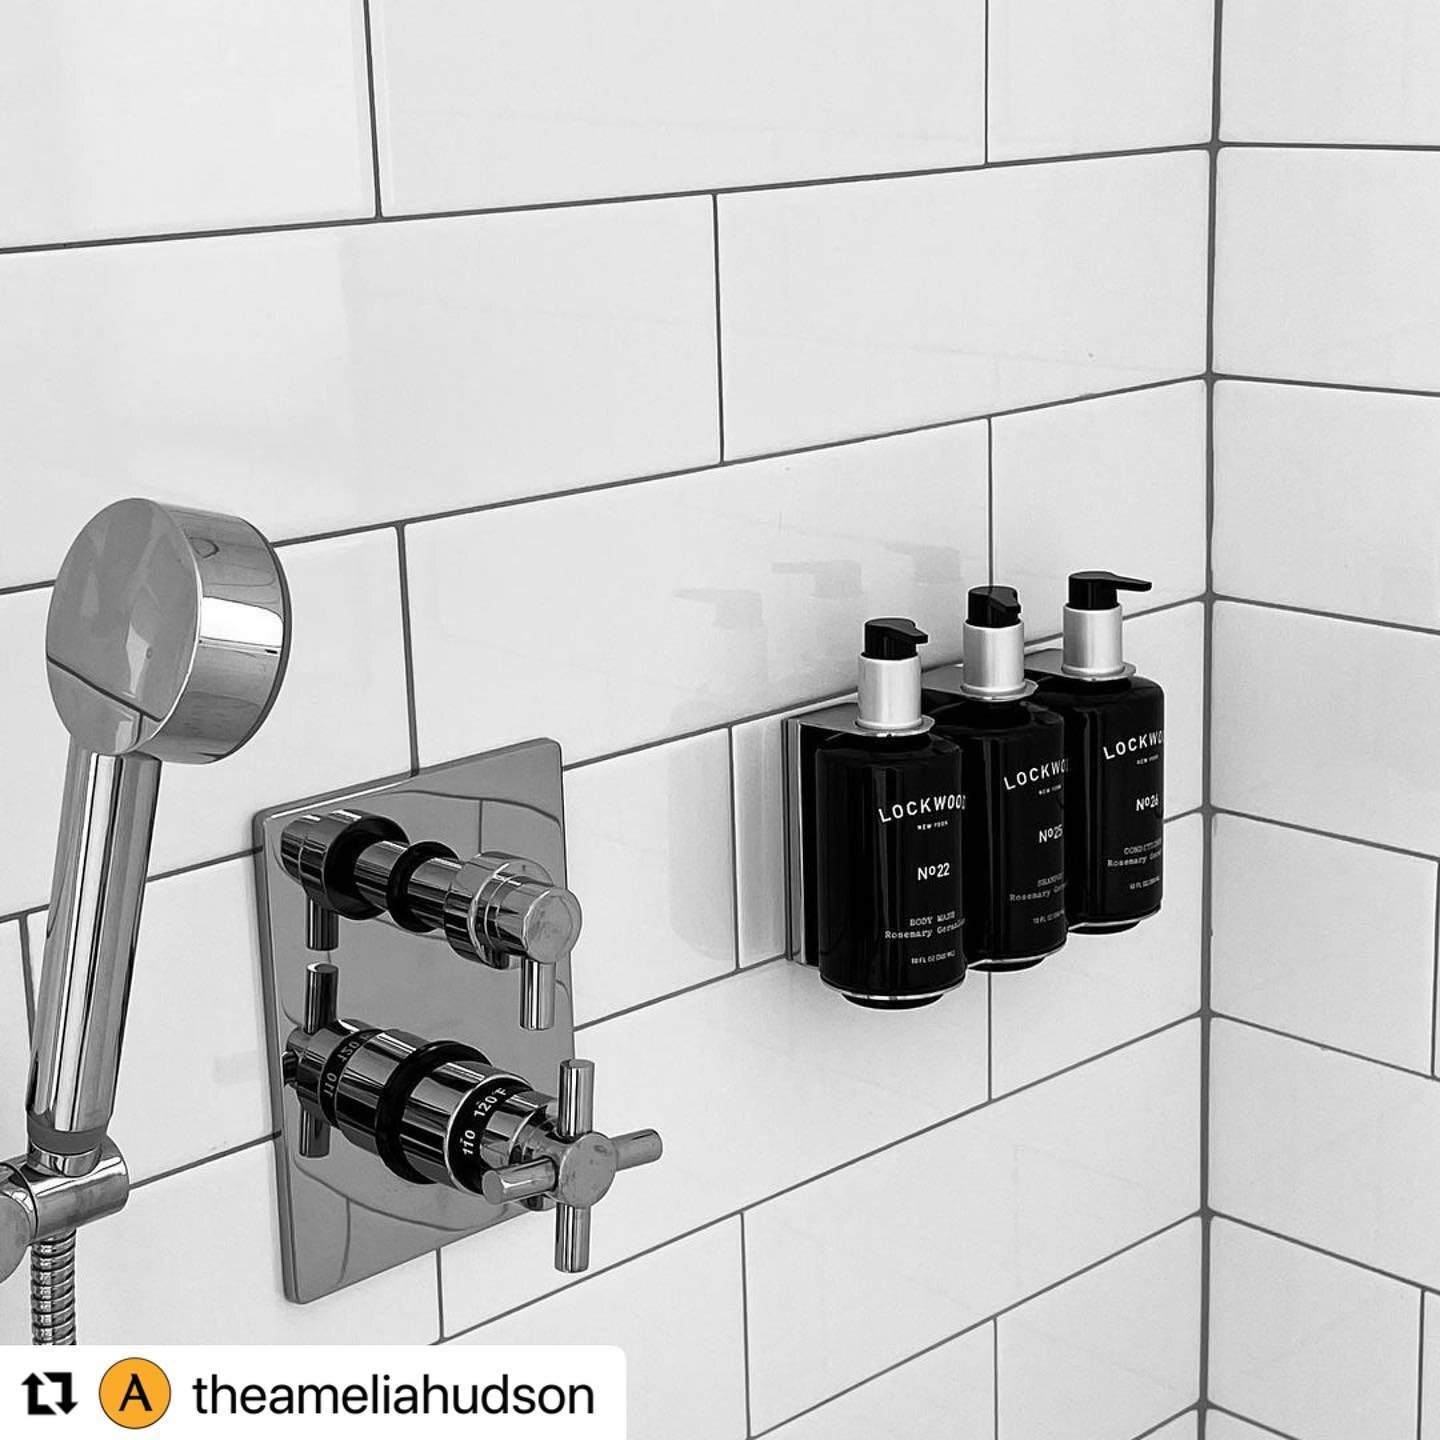 Congratulations to our friends @theameliahudson on their opening. We can&rsquo;t wait to come visit 🖤

#Repost @theameliahudson with @make_repost
・・・
We are proud to use clean skincare @lockwoodnewyork bath amenities handcrafted in the Hudson Valley